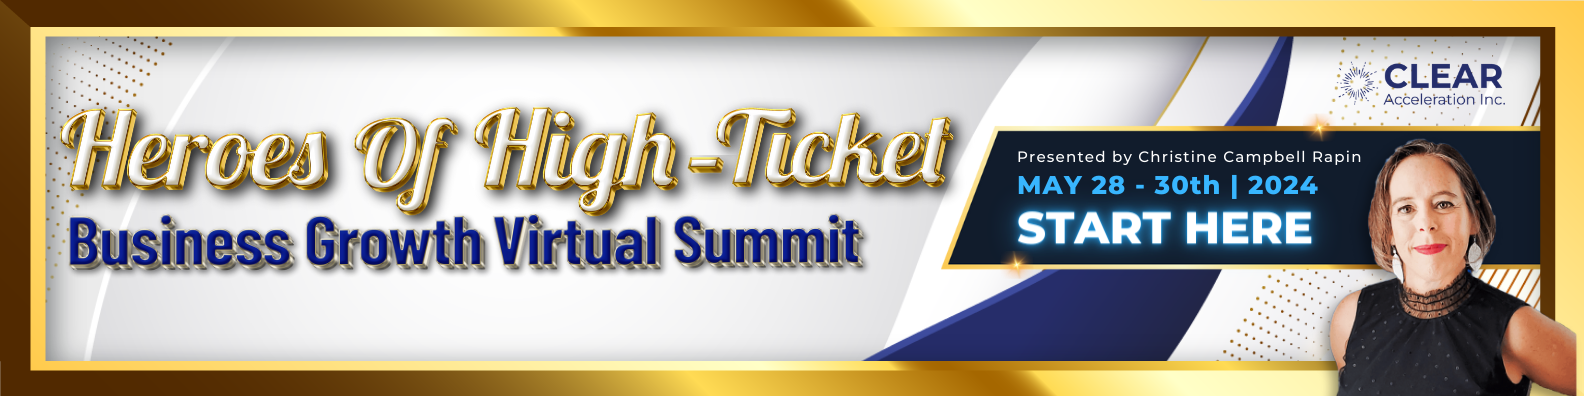 3Heroes of High-Ticket Business Growth Virtual Summit